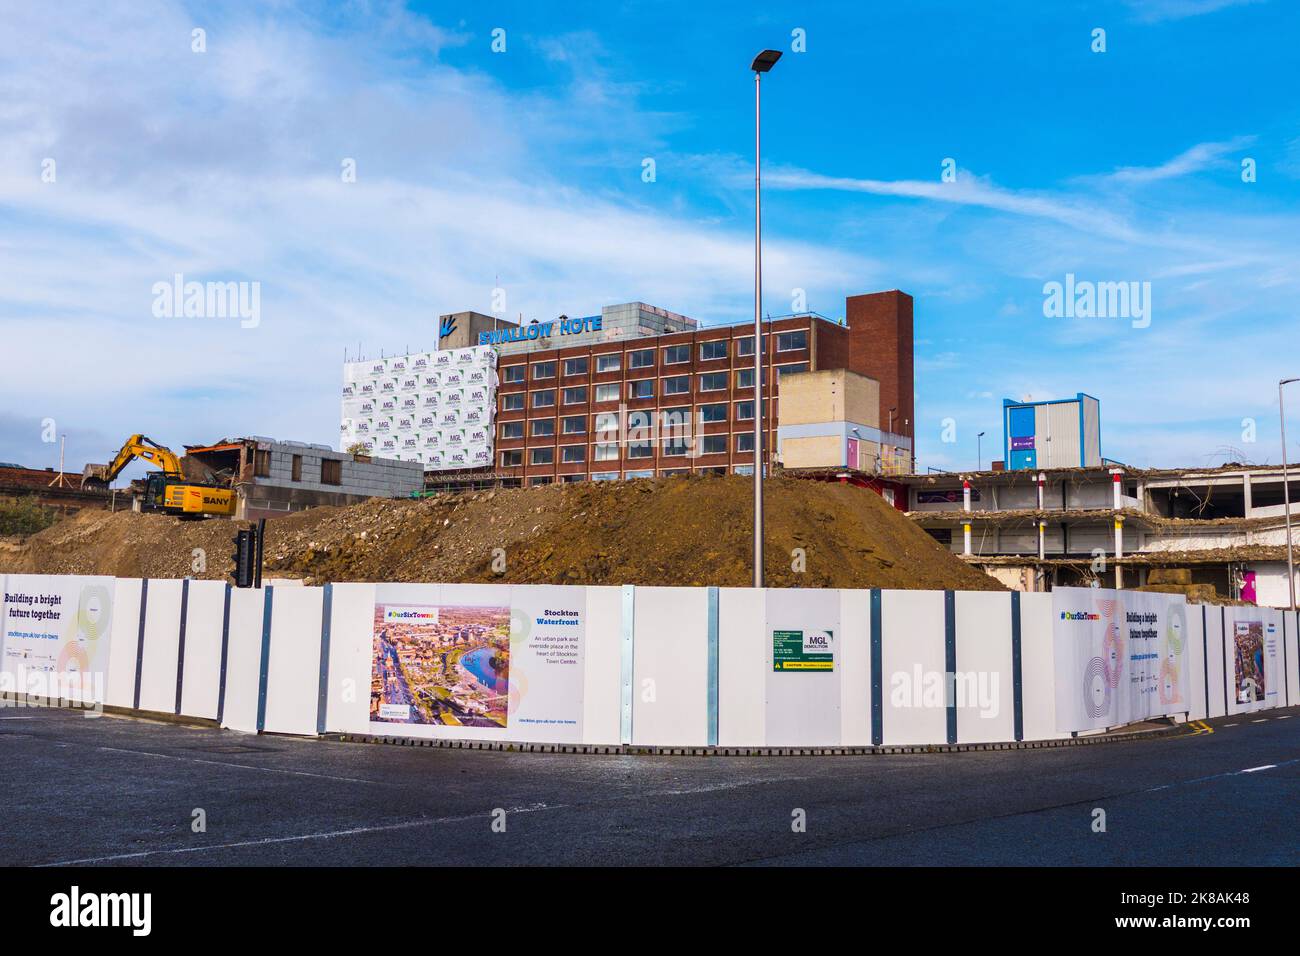 Stockton on Tees, UK. 21st October 2022. Demolition work has started on the Castlegate Centre as part of the Councils plans to open up the High Street to the riverside. David Dixon / Alamy Stock Photo